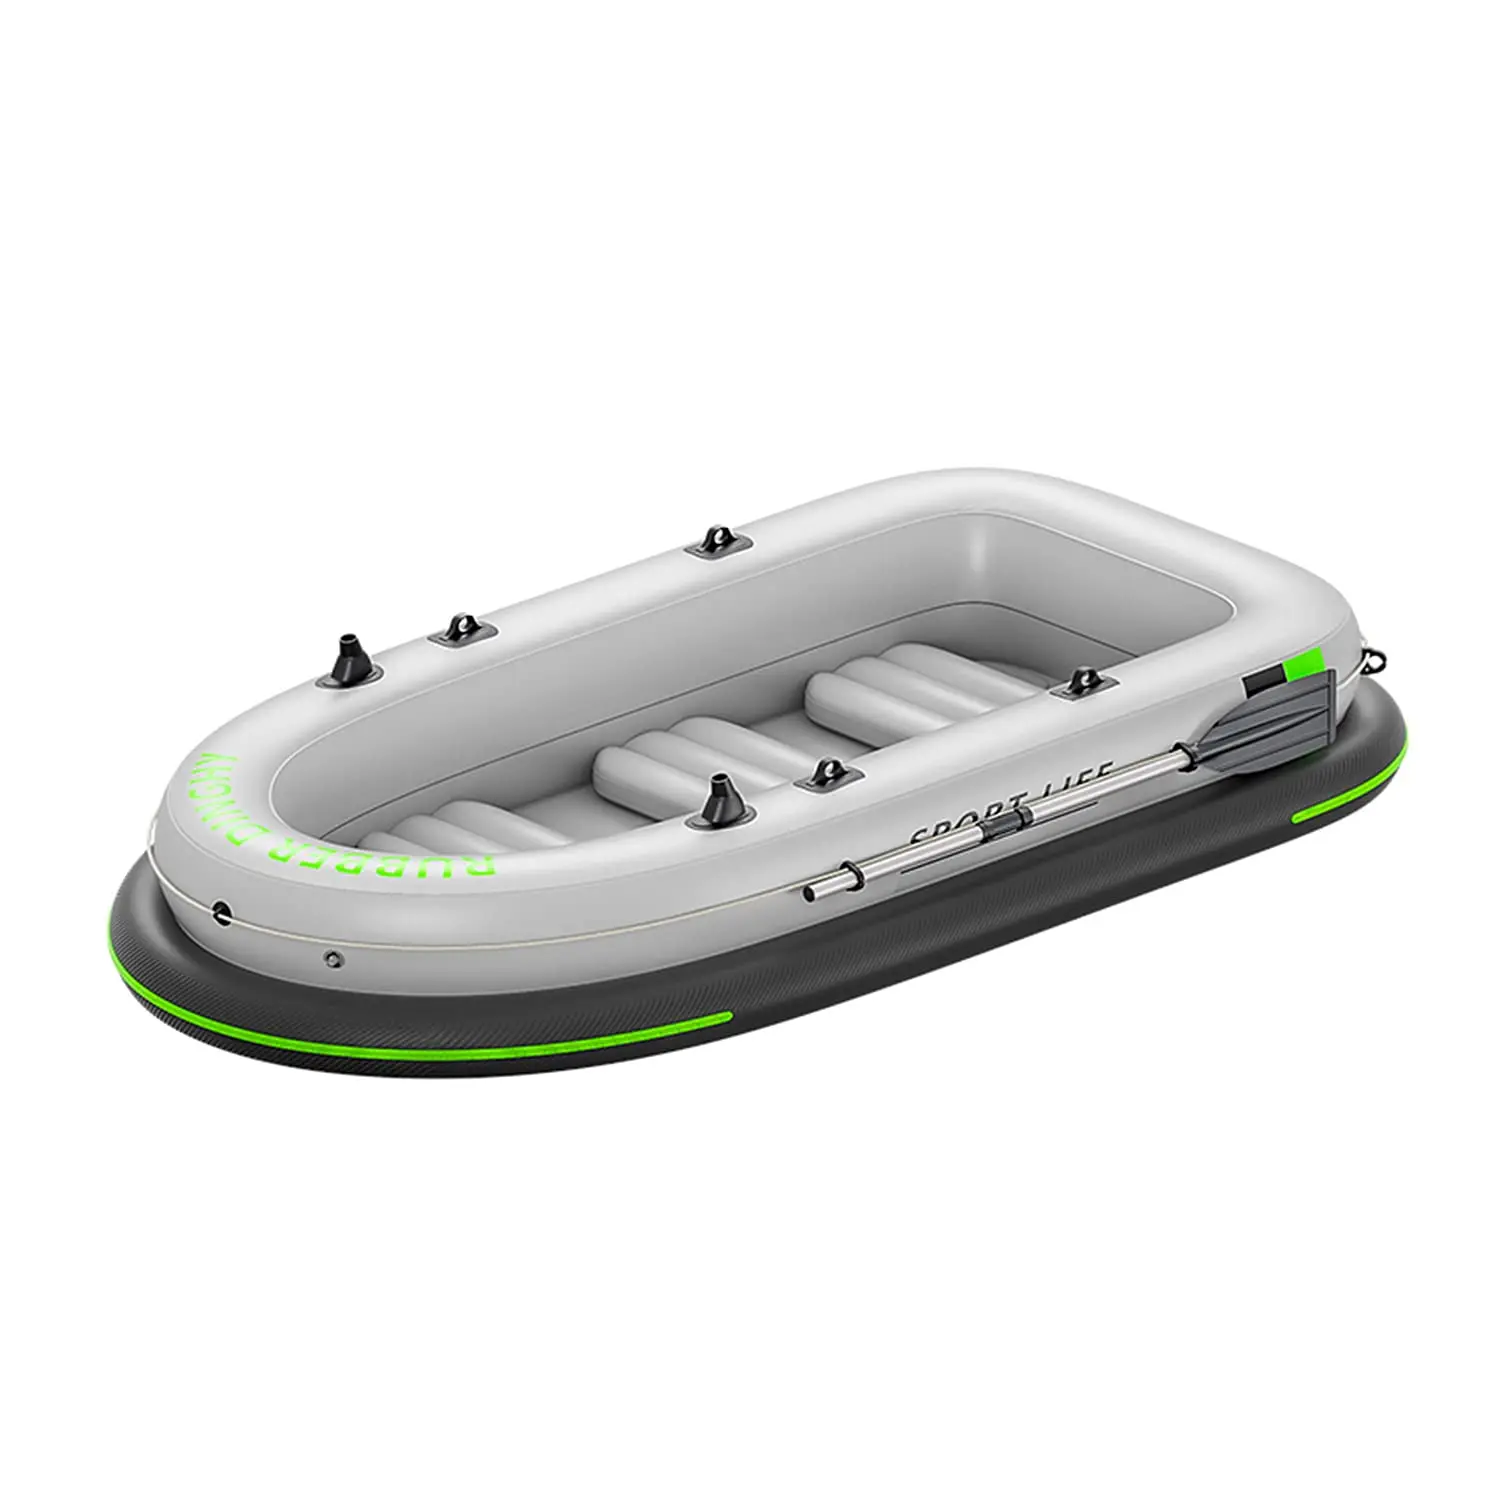 https://ae01.alicdn.com/kf/S95c04c7e74ba4925a1fcc3581c4db383d/Inflatable-Boat-for-Adults-Inflatable-Dinghy-Fishing-Inflatable-Kayak-Heavy-Duty-Inflatable-Canoe-River-Inflatable-Raft.jpg